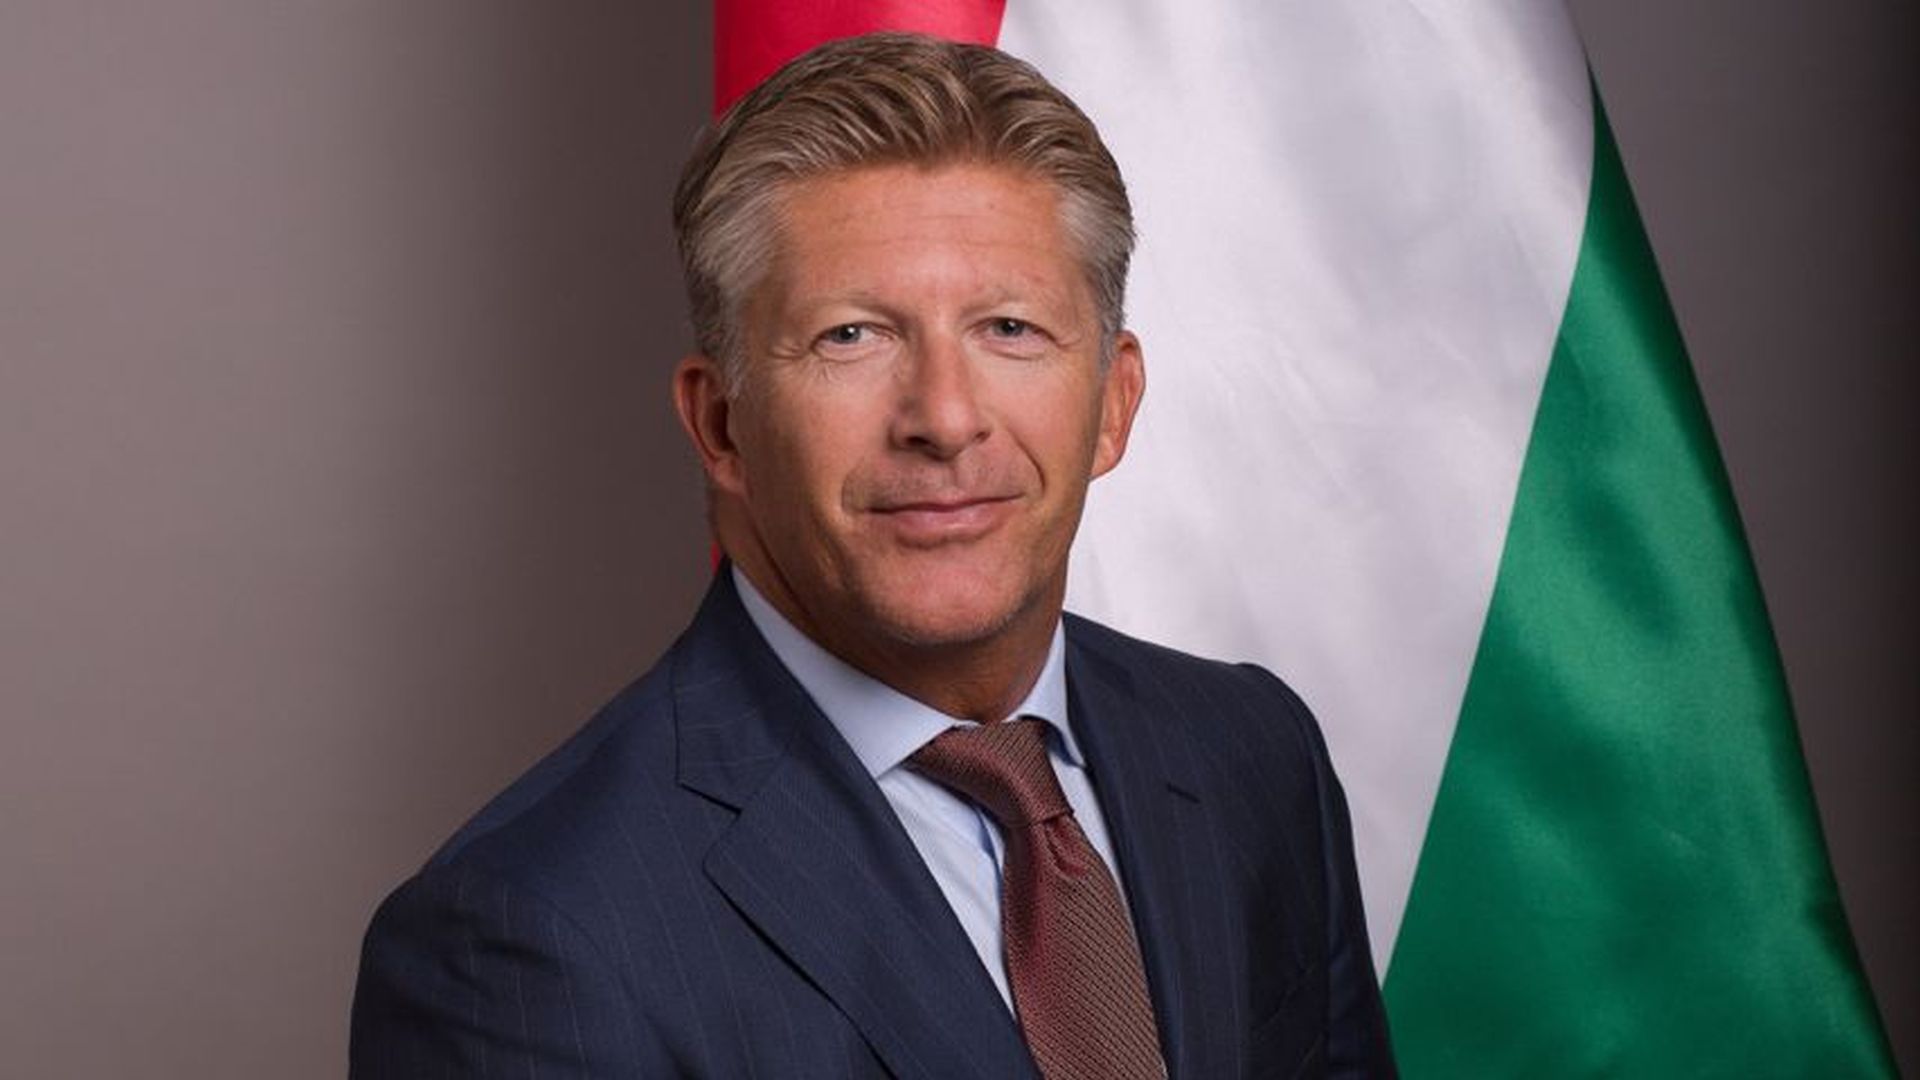 István Papp, Vice President of Business Development of the Hungarian Investment Promotion Agency (HIPA)